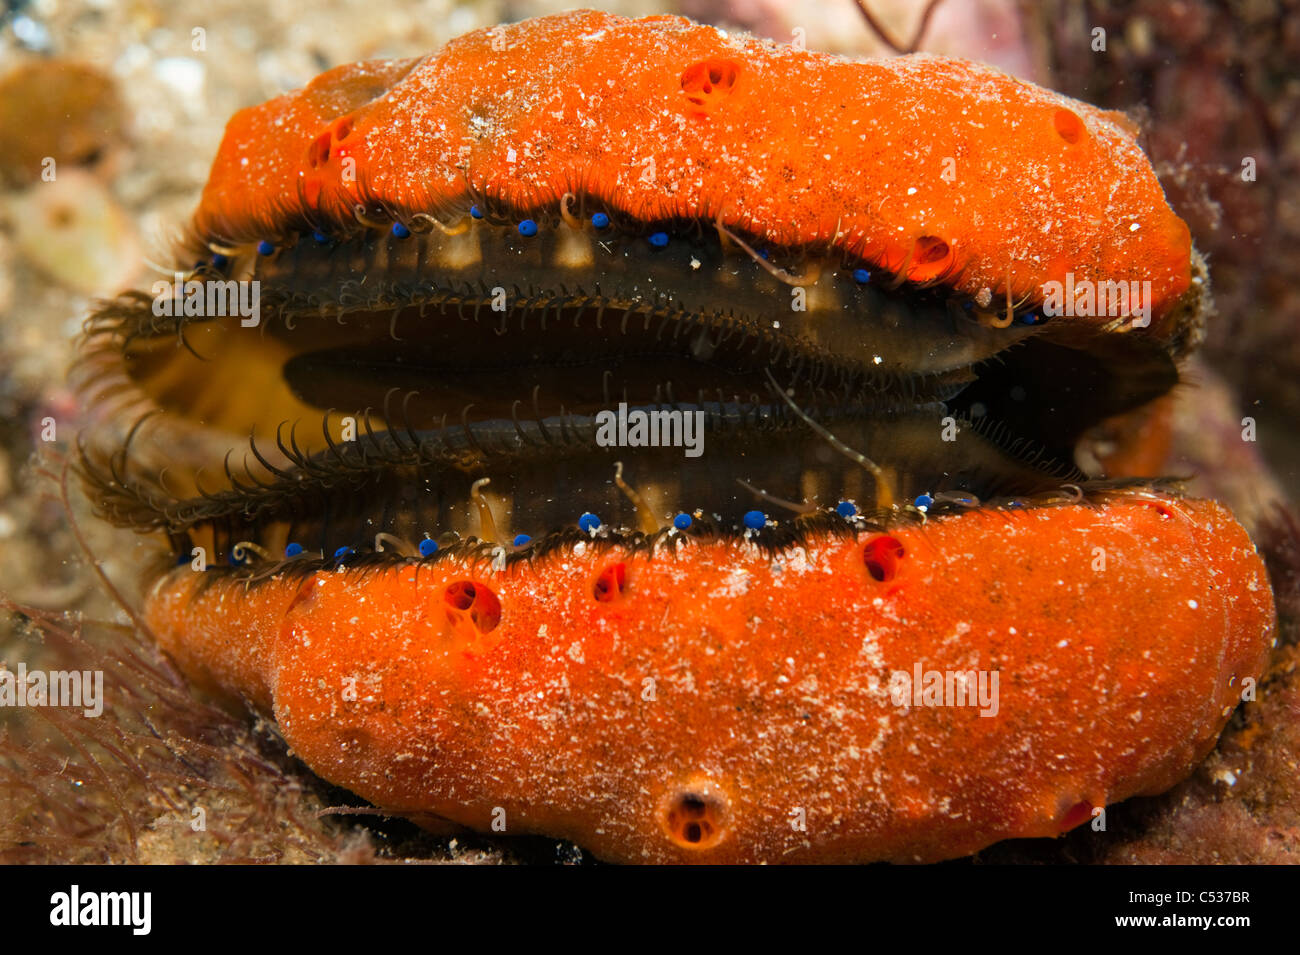 Fan Shell or Doughboy Scallop (Chlamys asperrimus) photographed in South Australia. Stock Photo